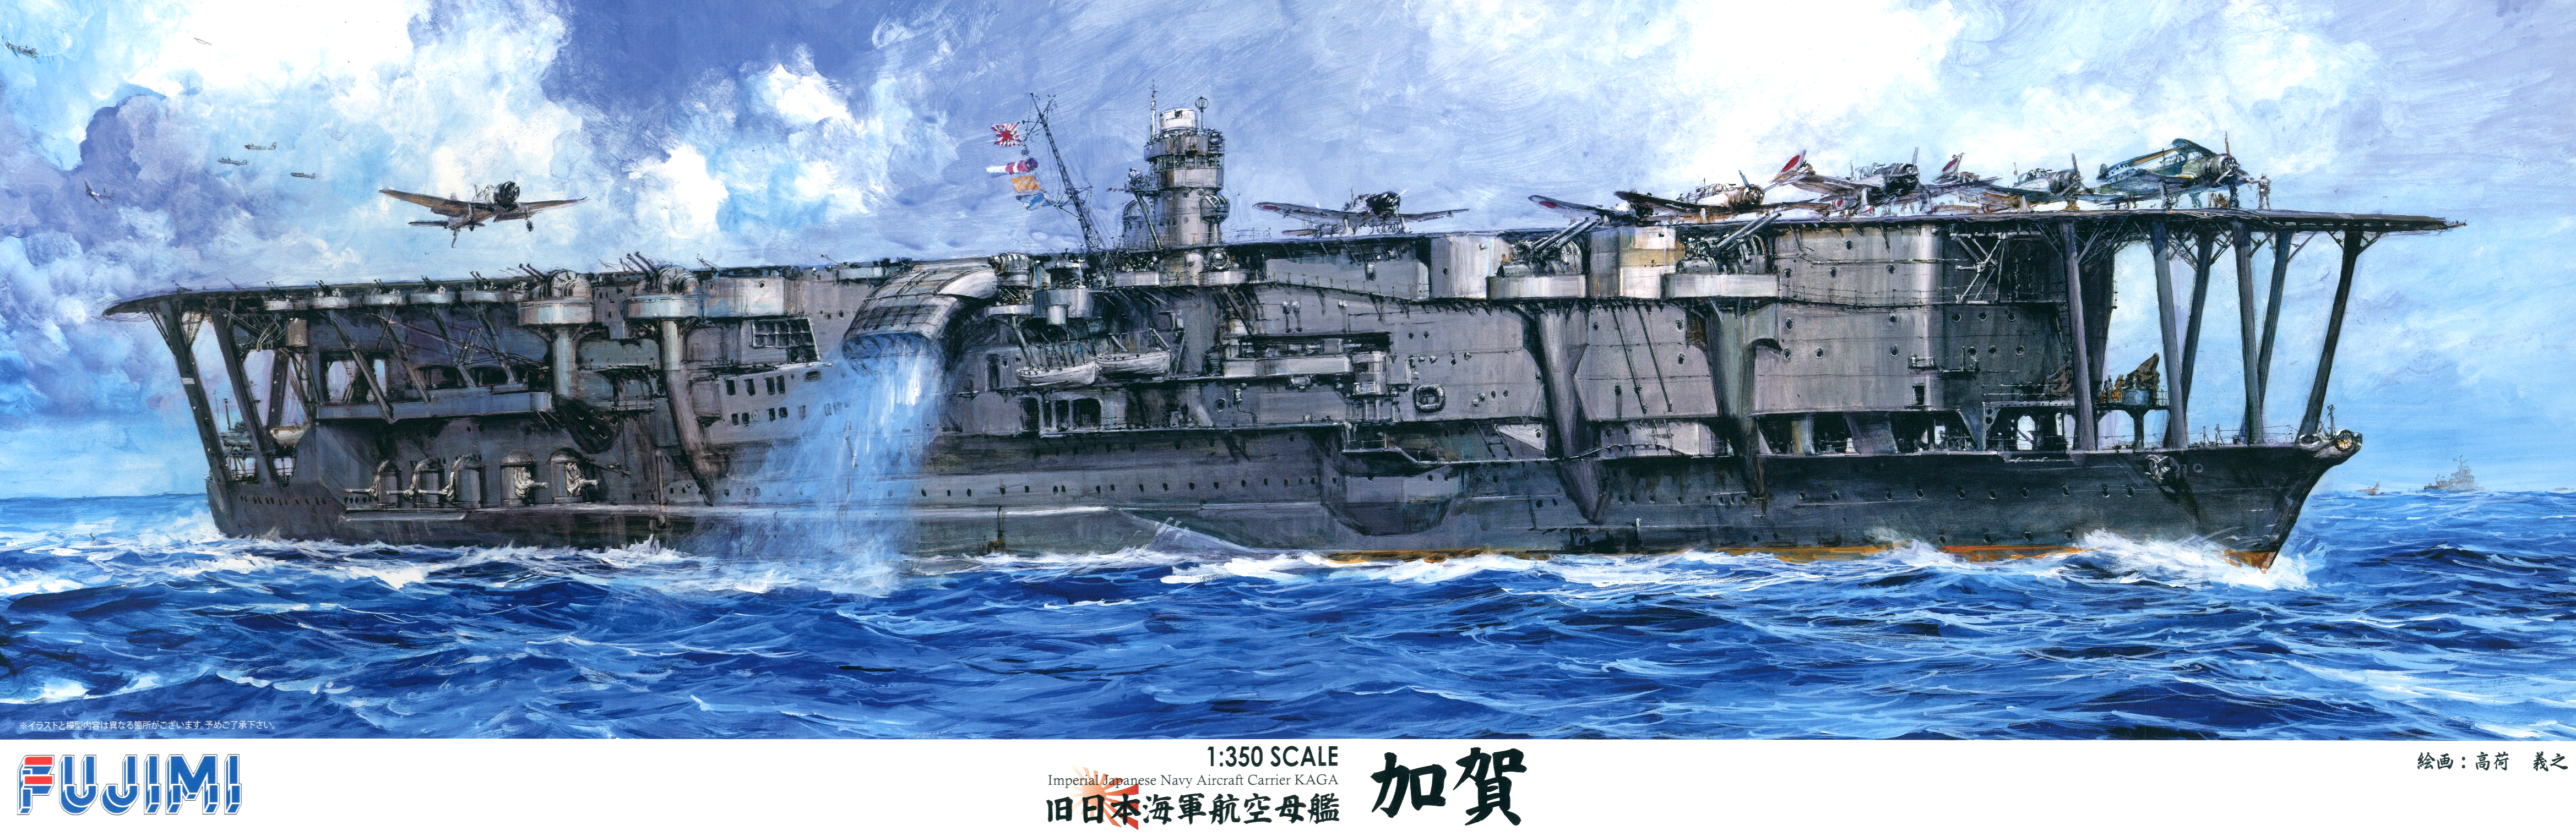 Pearl Harbor Aircraft Carriers